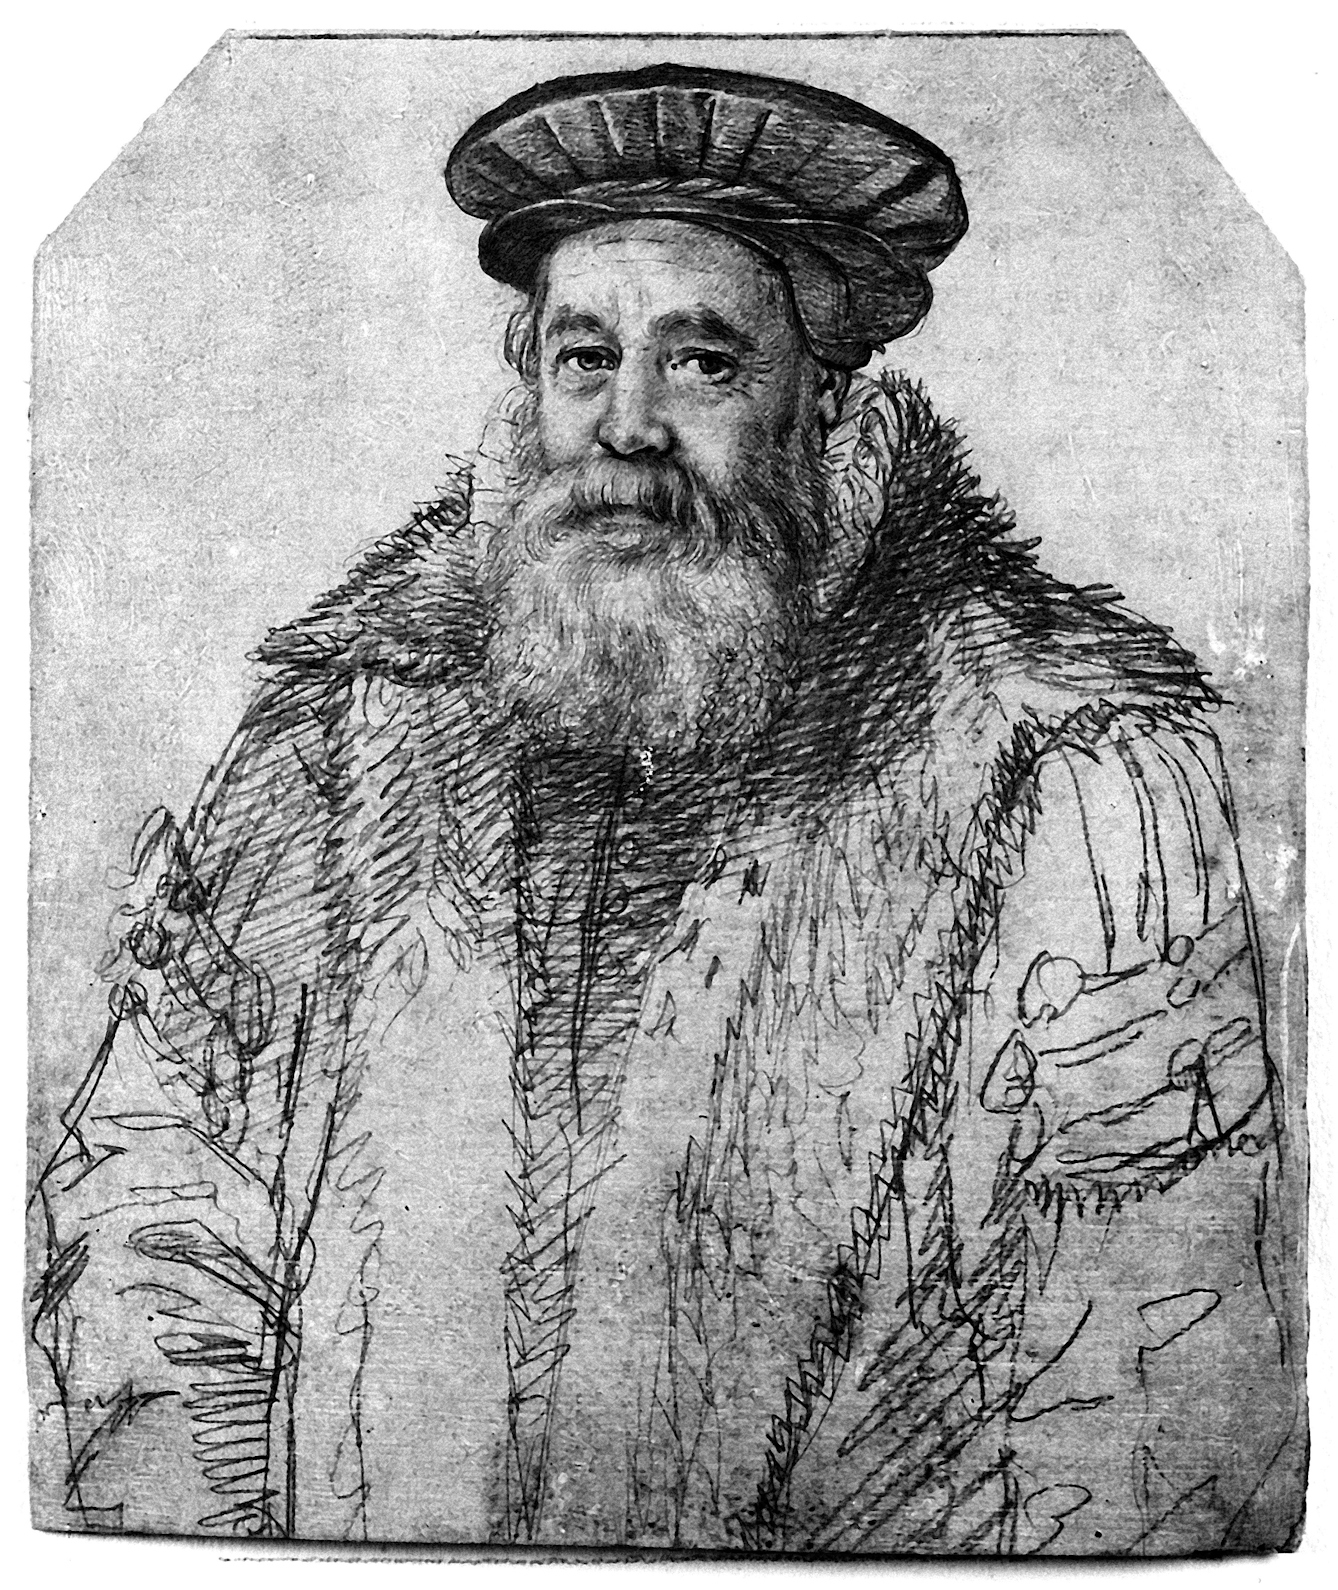 Black and white sketch of a bearded man in a heavy coat and Tudor-style bonnet.